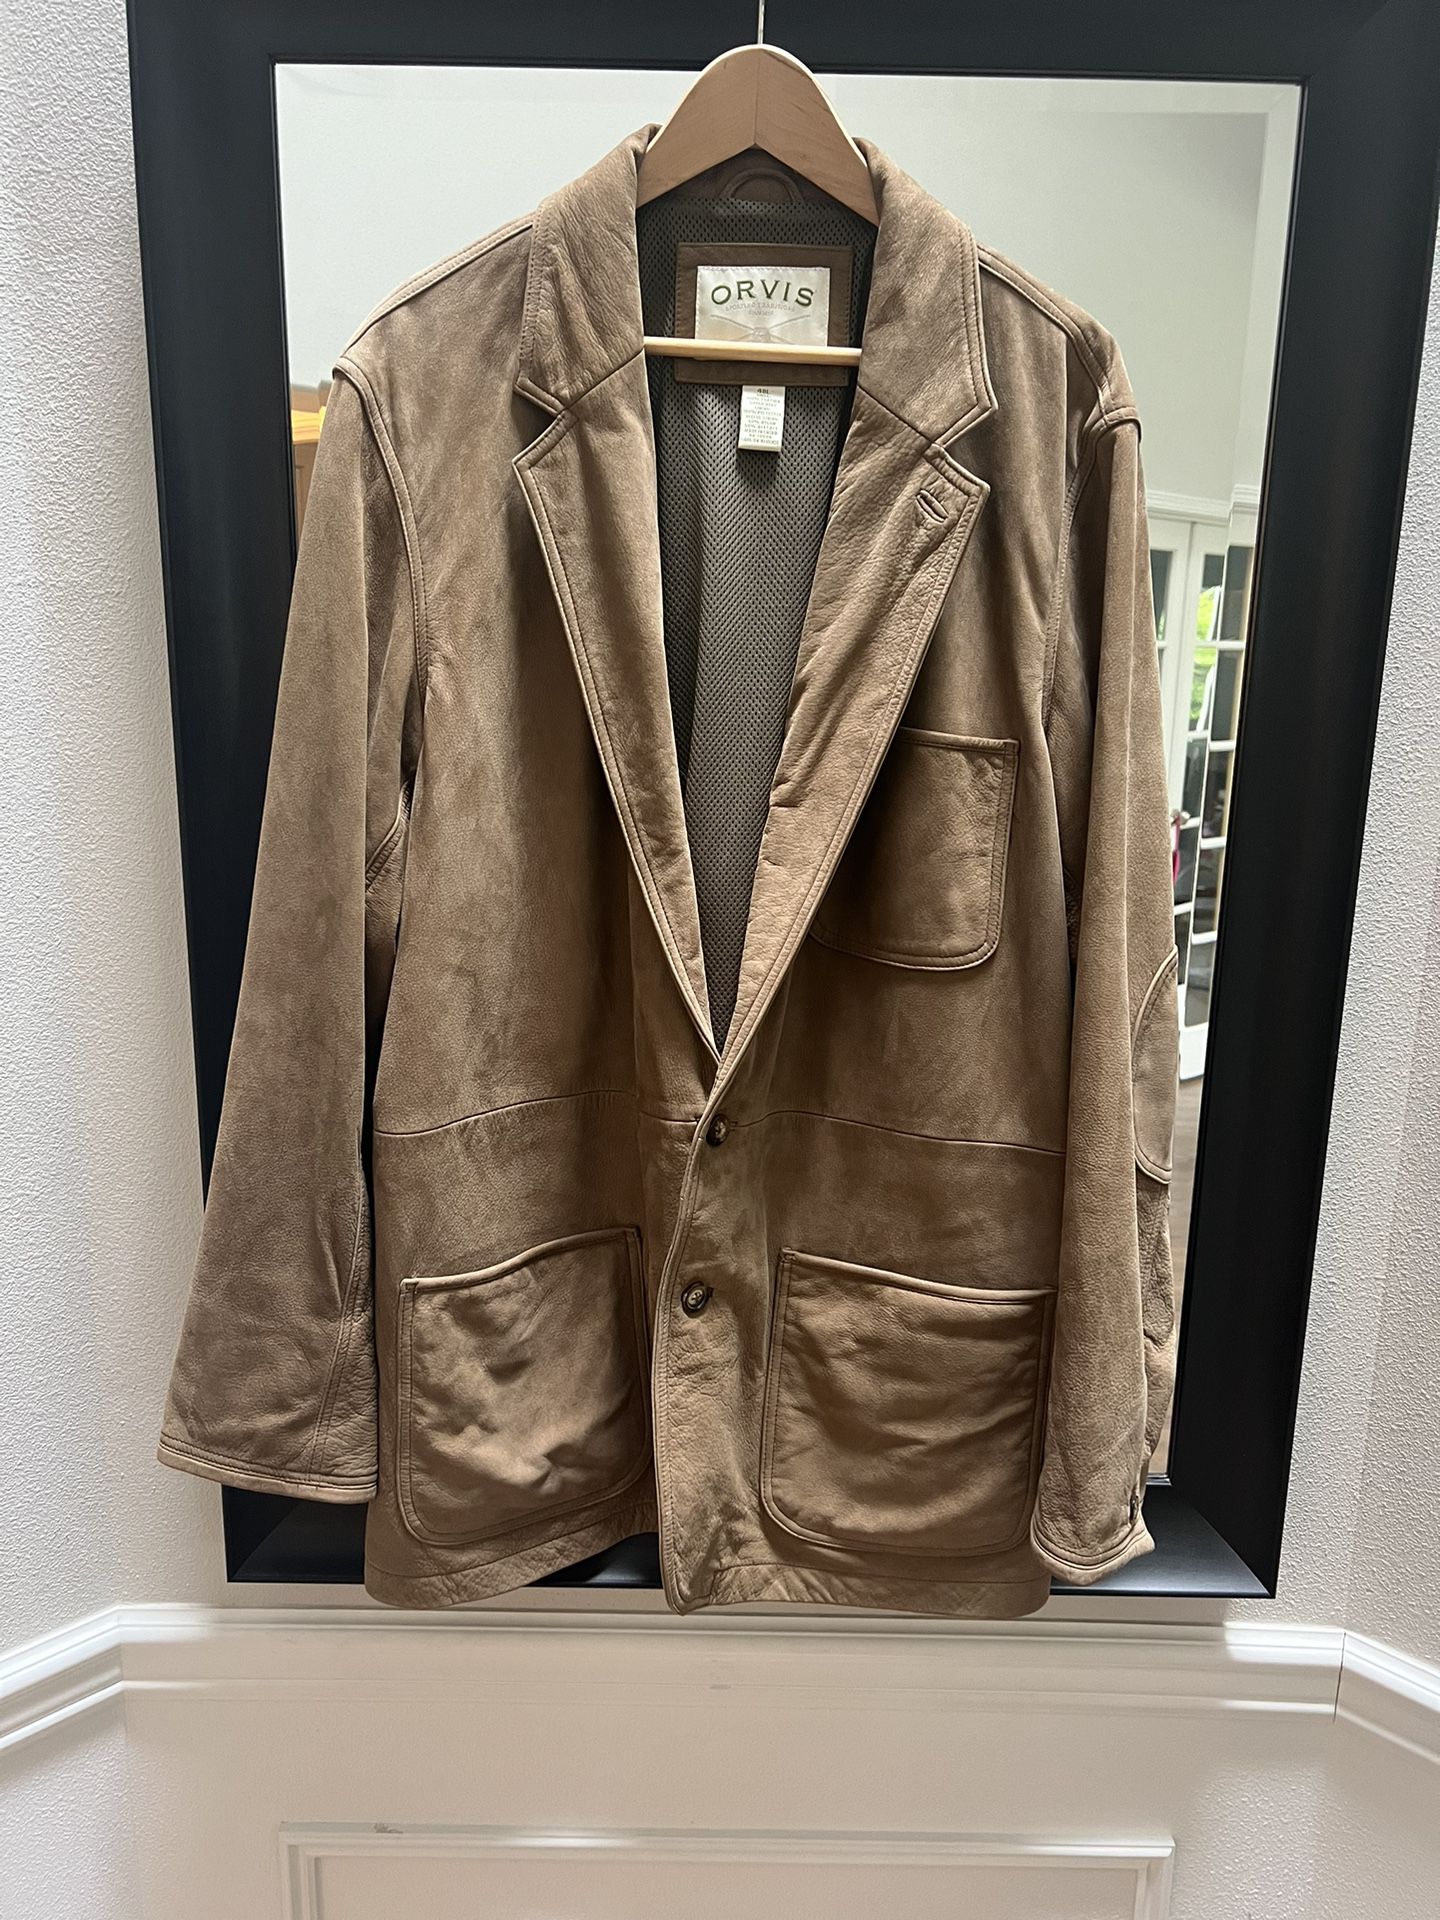 Orvis Single Breasted Leather Blazer